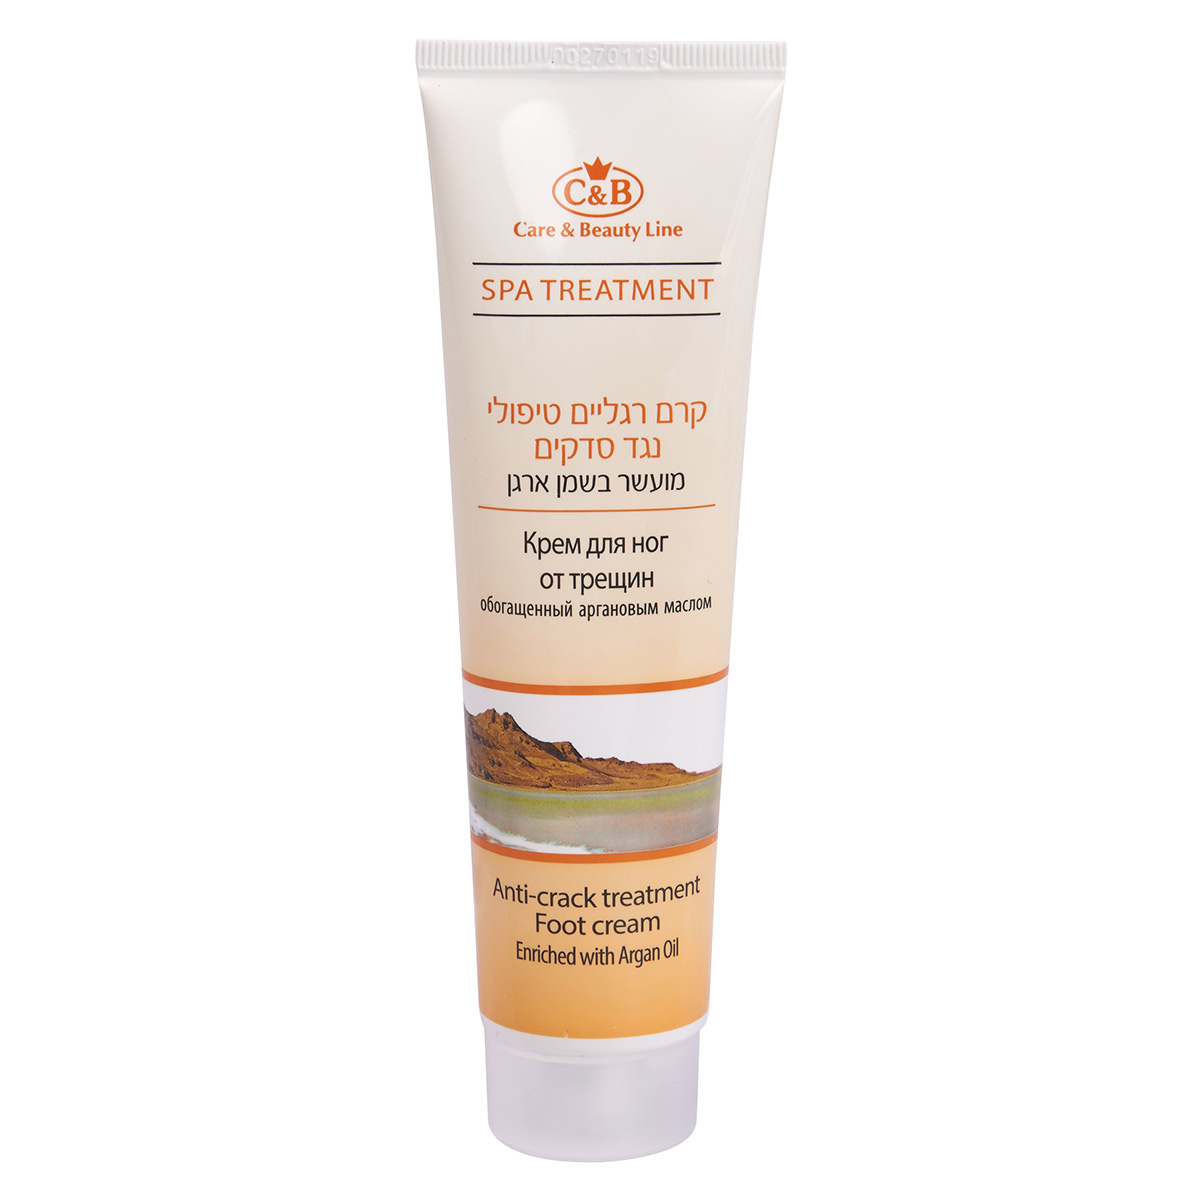 Therapeutic foot cream enriched with argan oil